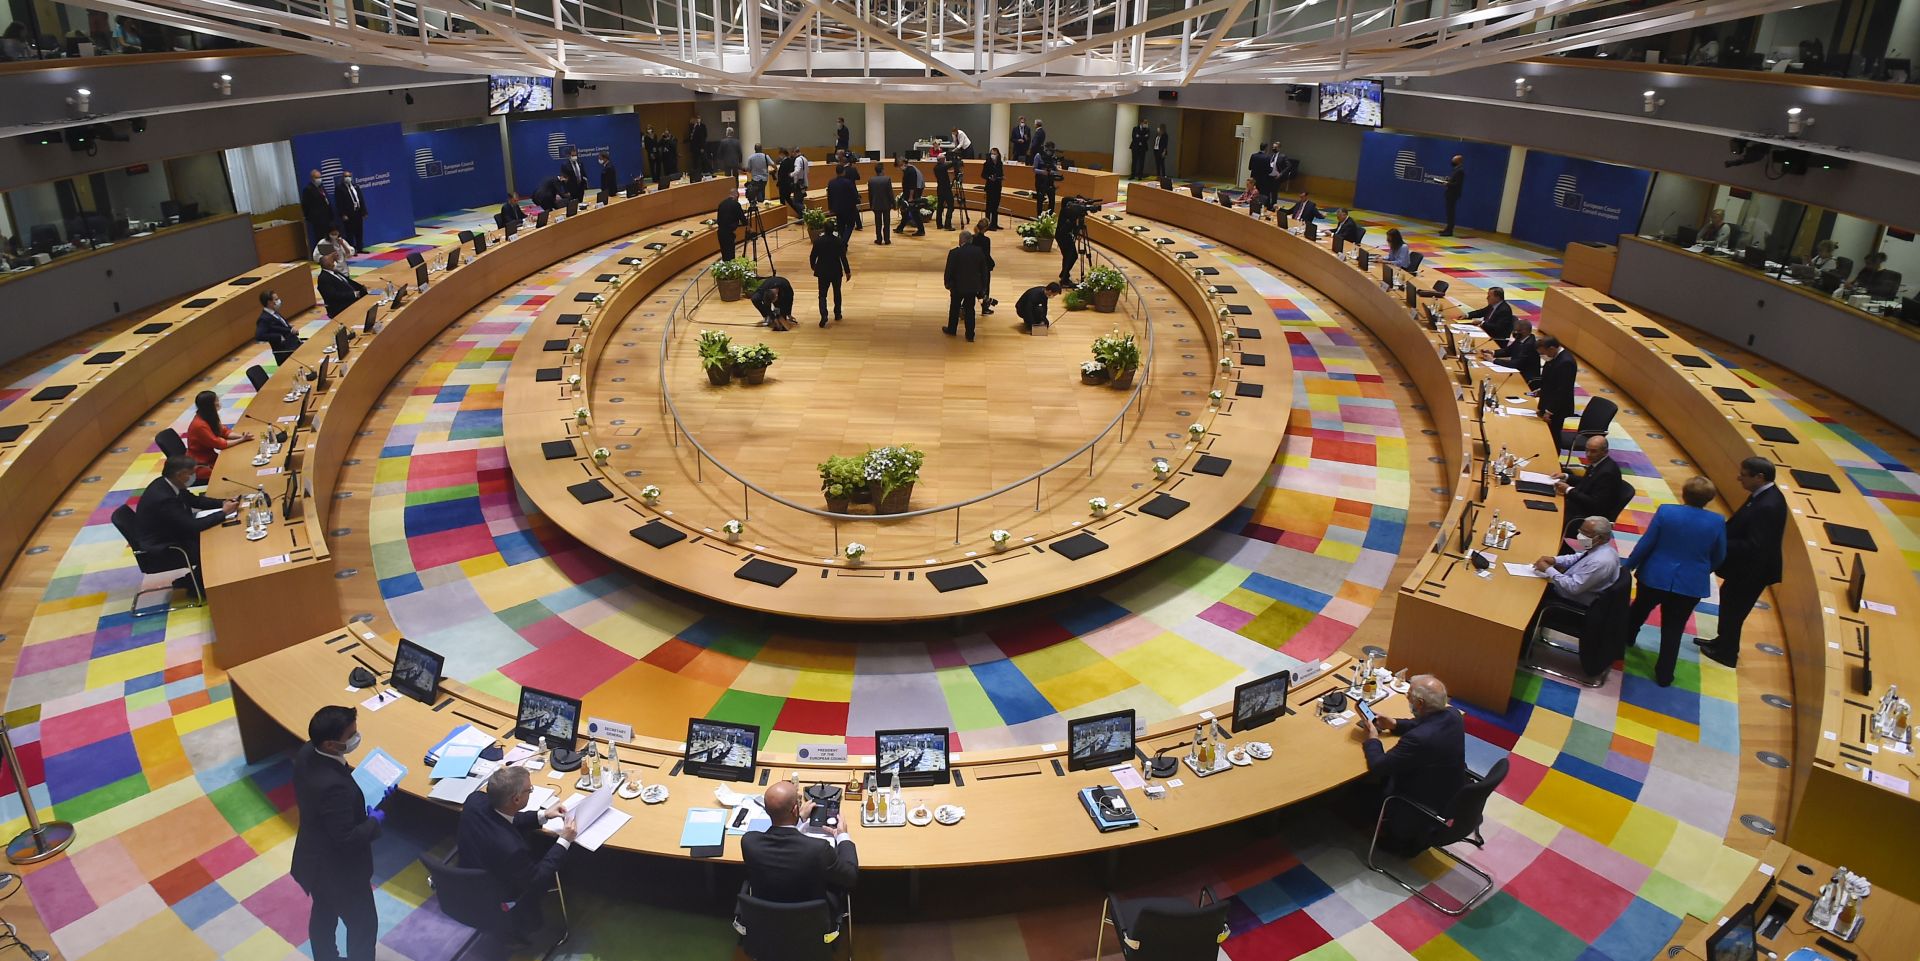 epa08553224 A general view of the second day of an EU summit in Brussels, Belgium, 18 July 2020. European Union nations leaders meet face-to-face for the first time since February to discuss plans responding to coronavirus crisis and new long-term EU budget at the special European Council on 17 and 18 July.